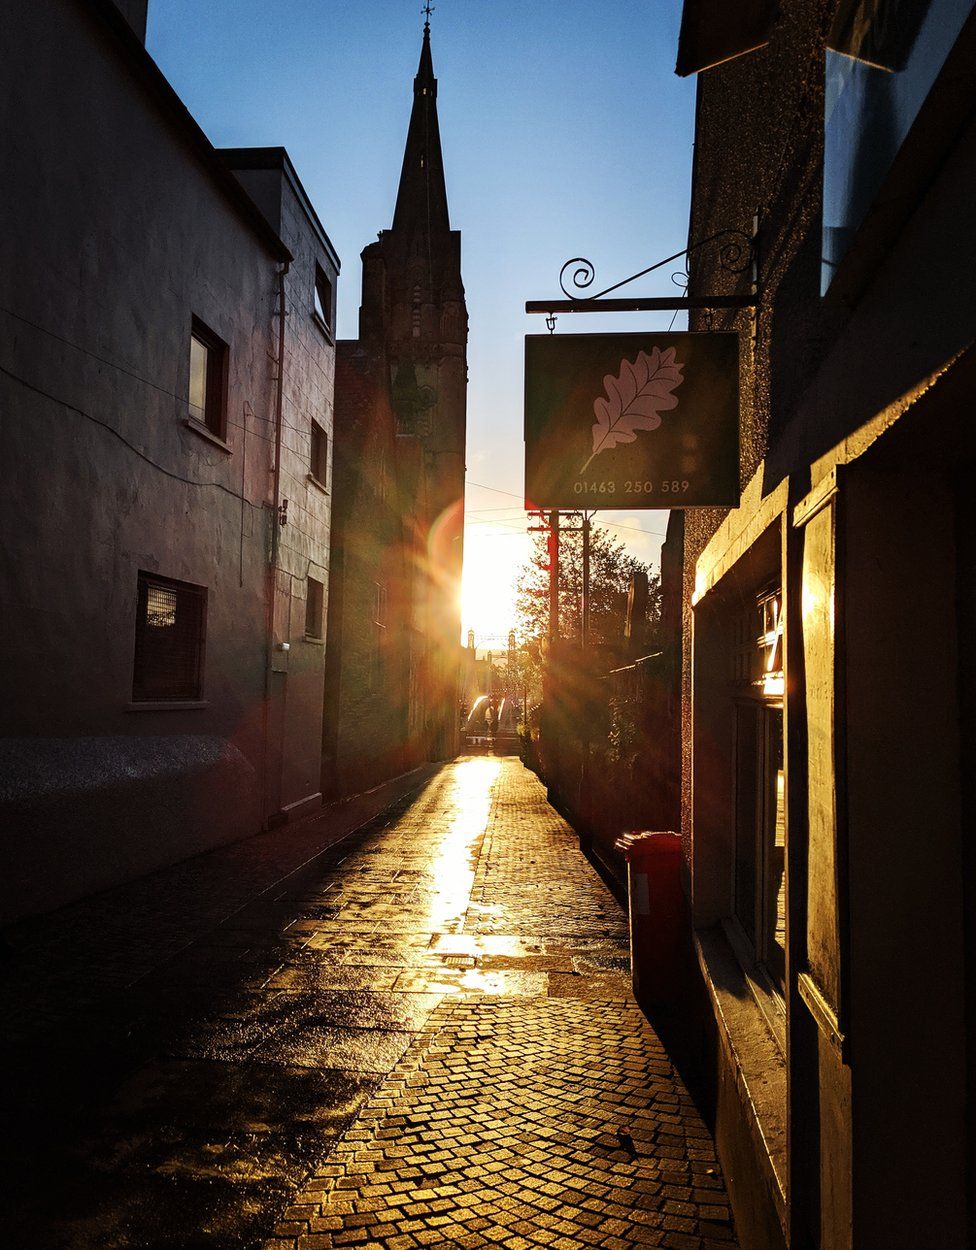 A sunset in Inverness looking down a street, with a wheelie bin in the right hand side